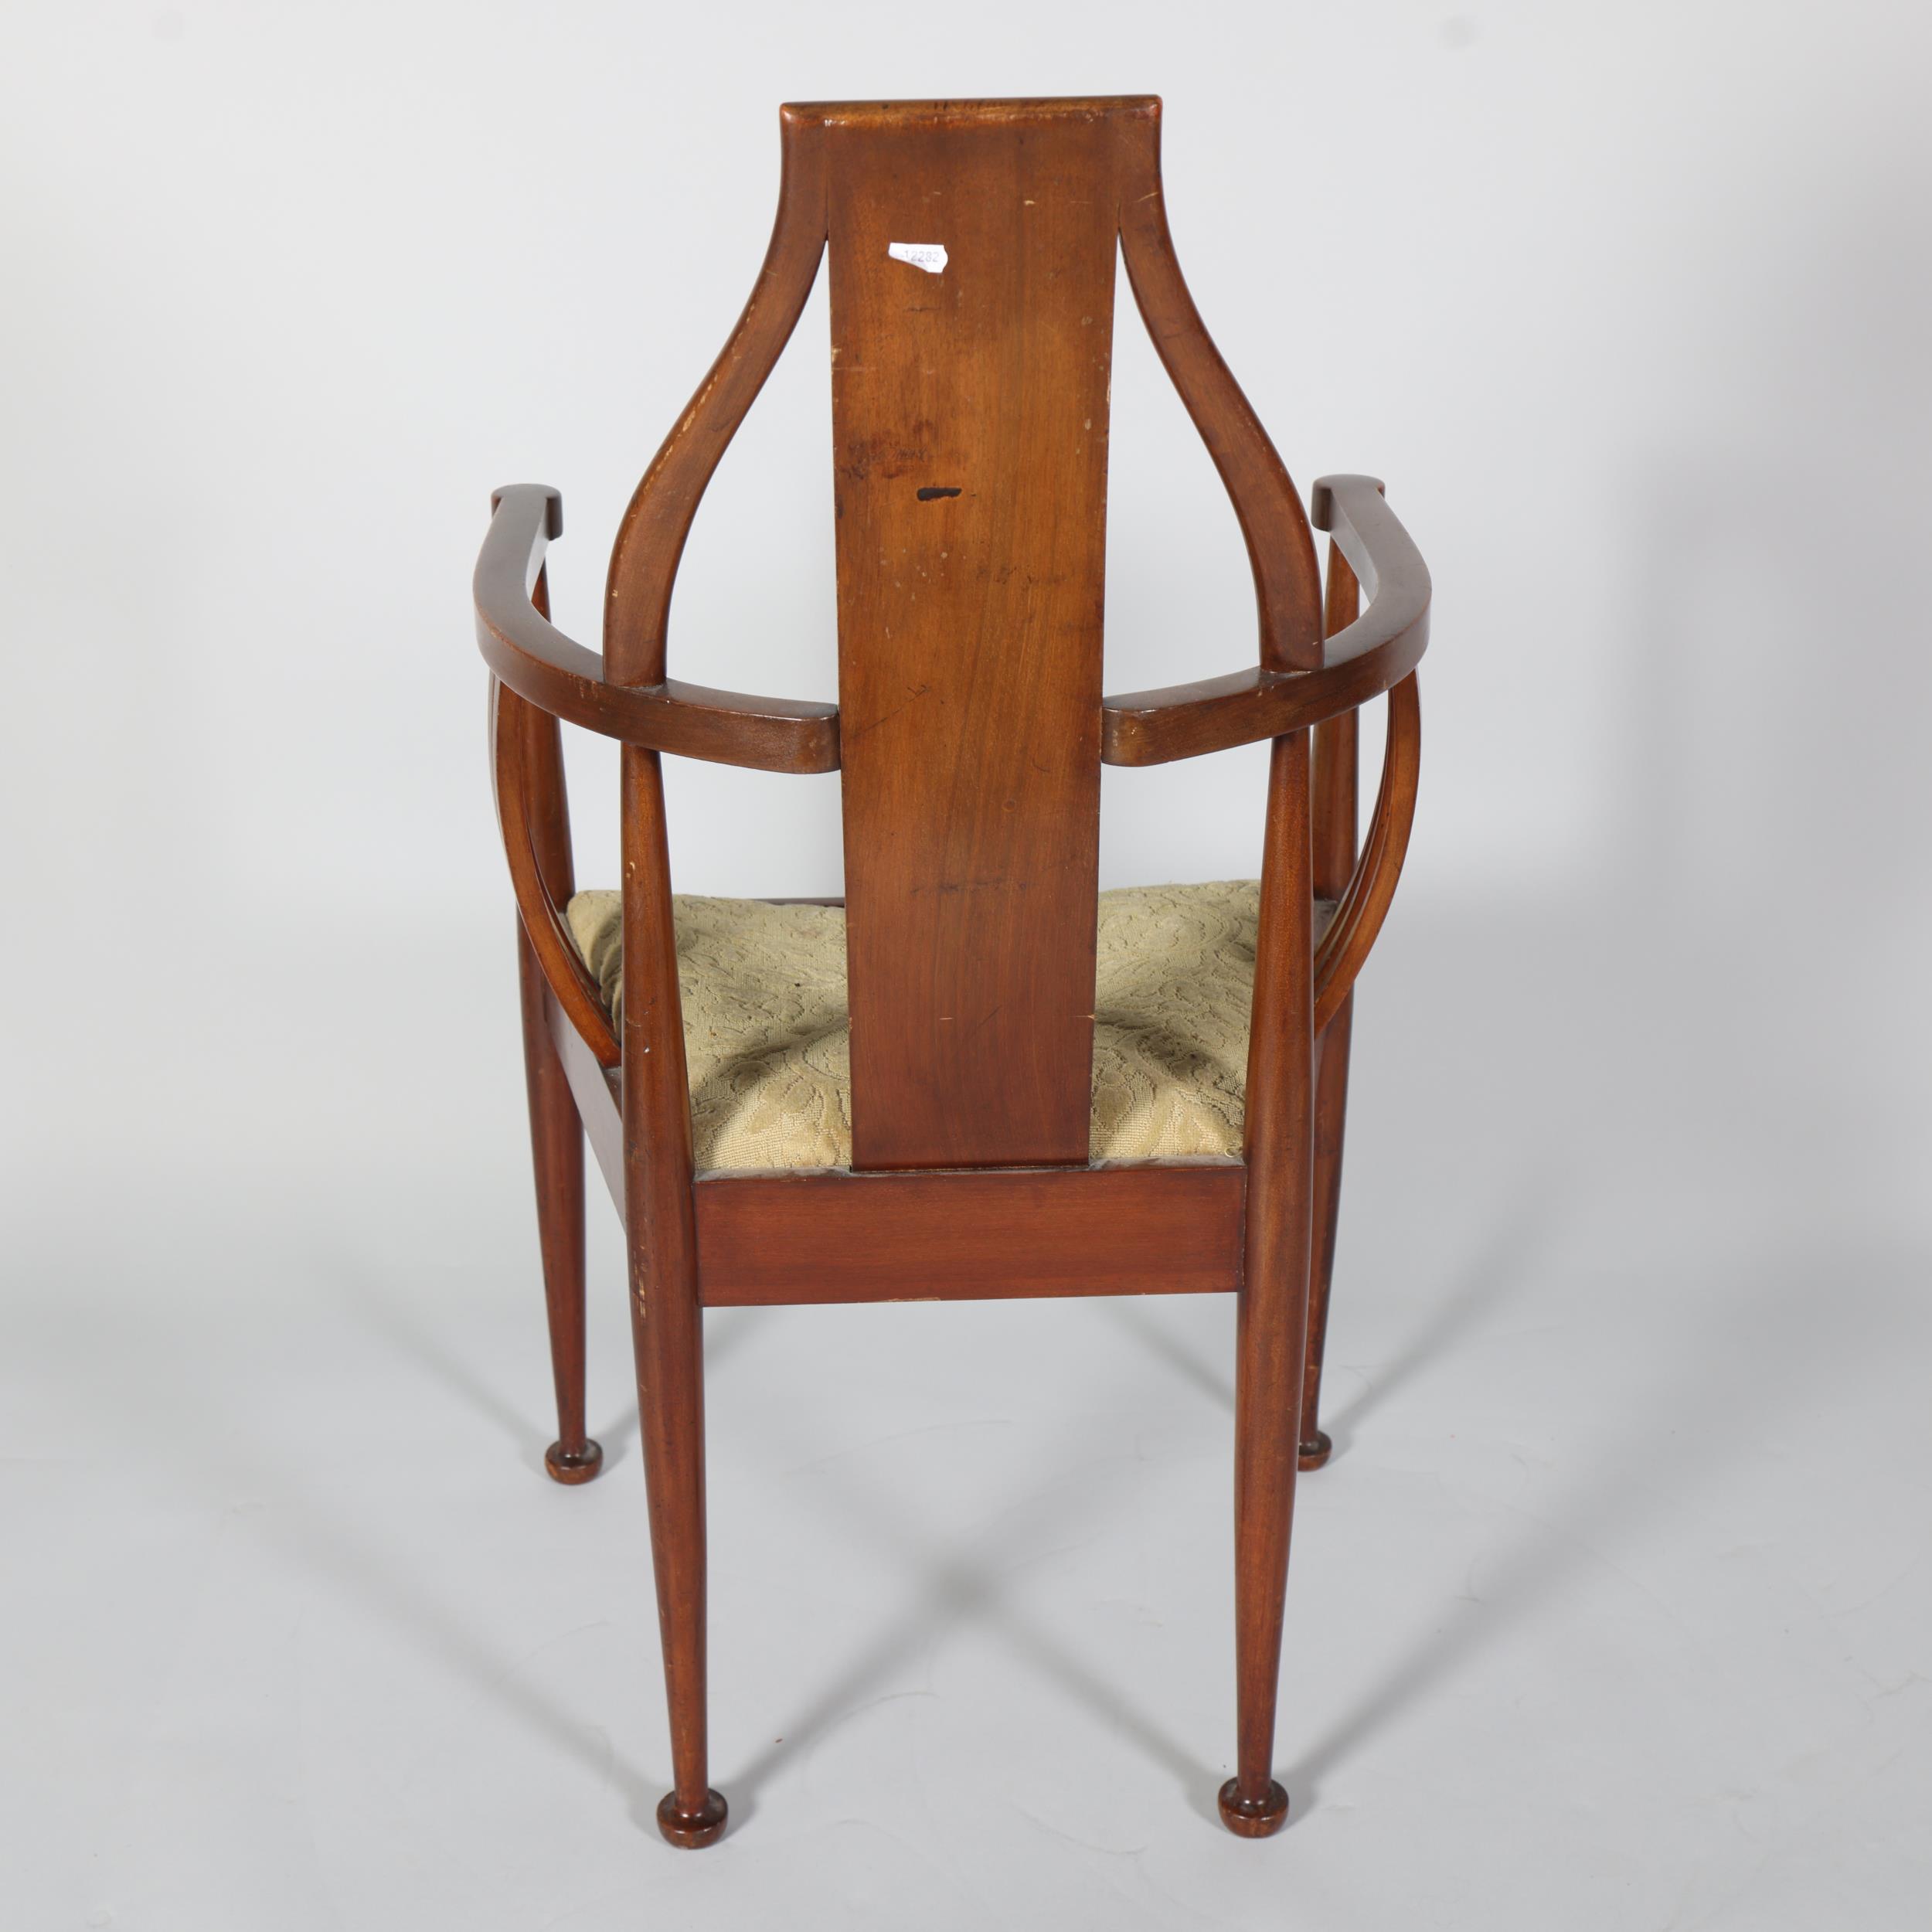 Scottish Art Nouveau mahogany bow-arm hall chair, with marquetry inlaid back, height 97cm - Image 4 of 5